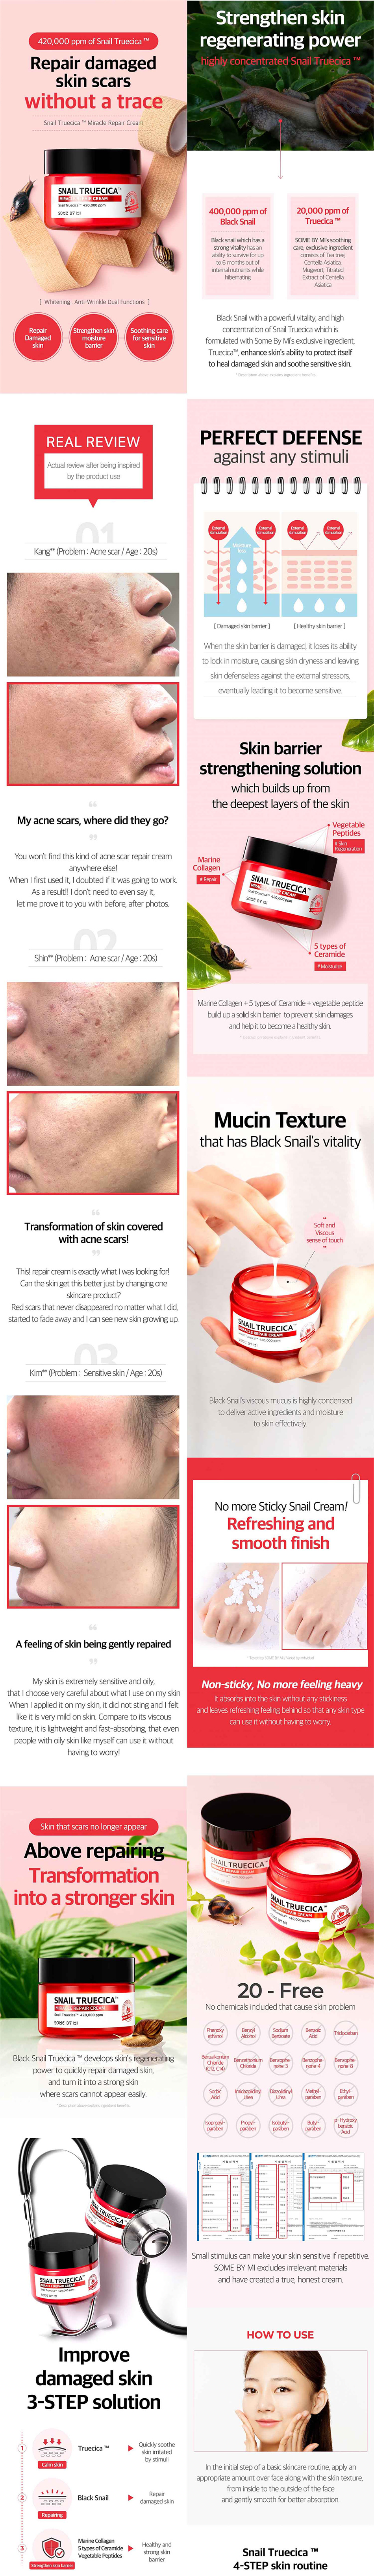 SOME BY MI Snail Truecica Miracle Repair Cream 60g review